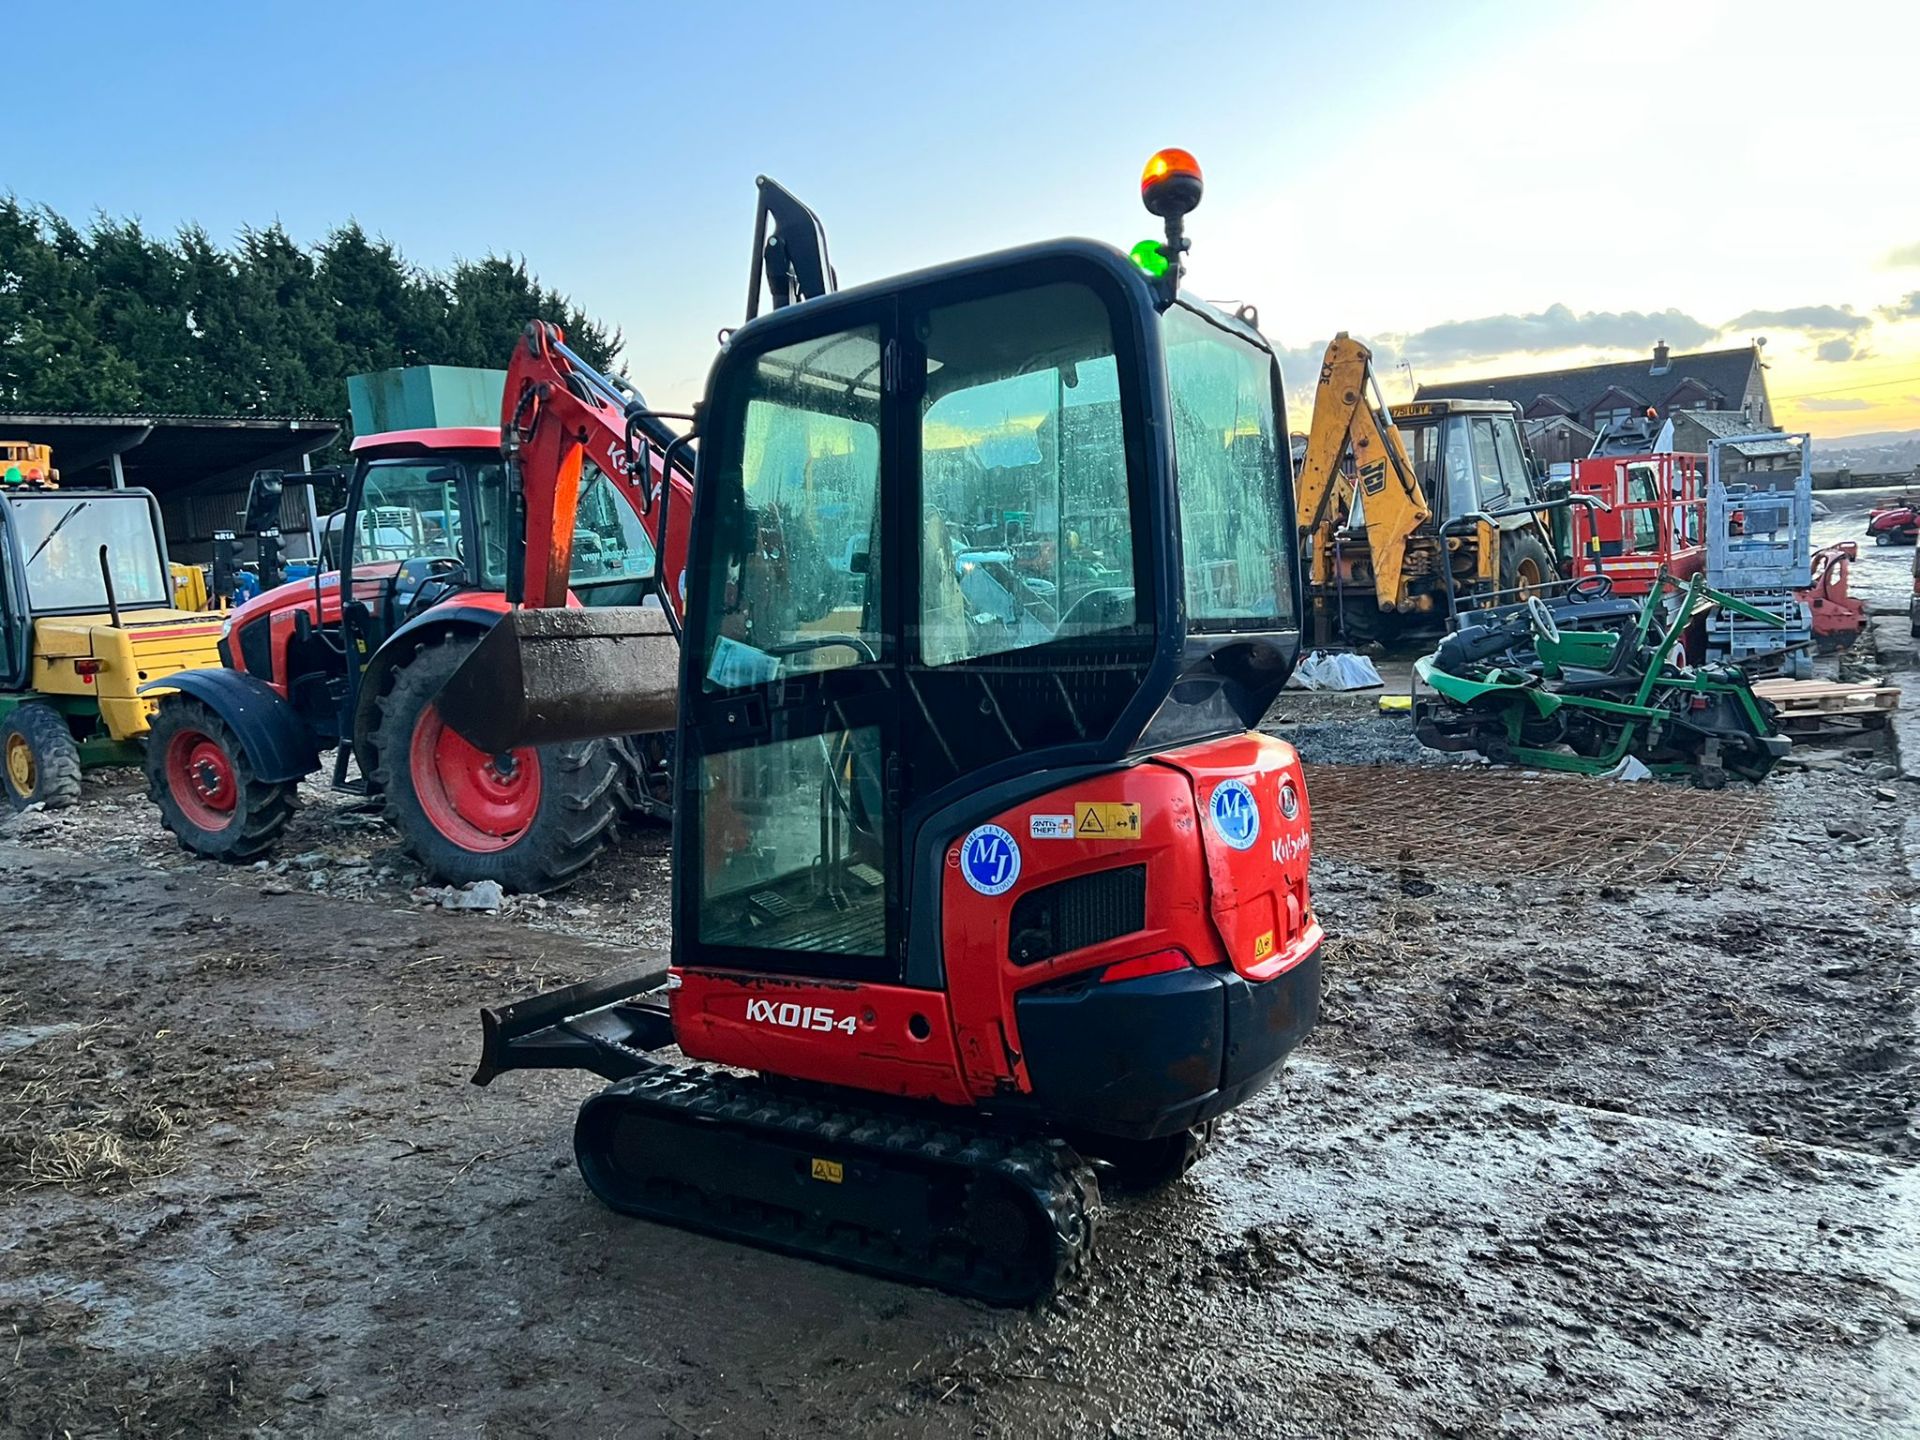 2015 KUBOTA KX015-4 1.5 TON MINI DIGGER, RUNS DRIVES DIGS, SHOWING A LOW AND GENUINE 1850 HOURS - Image 4 of 11